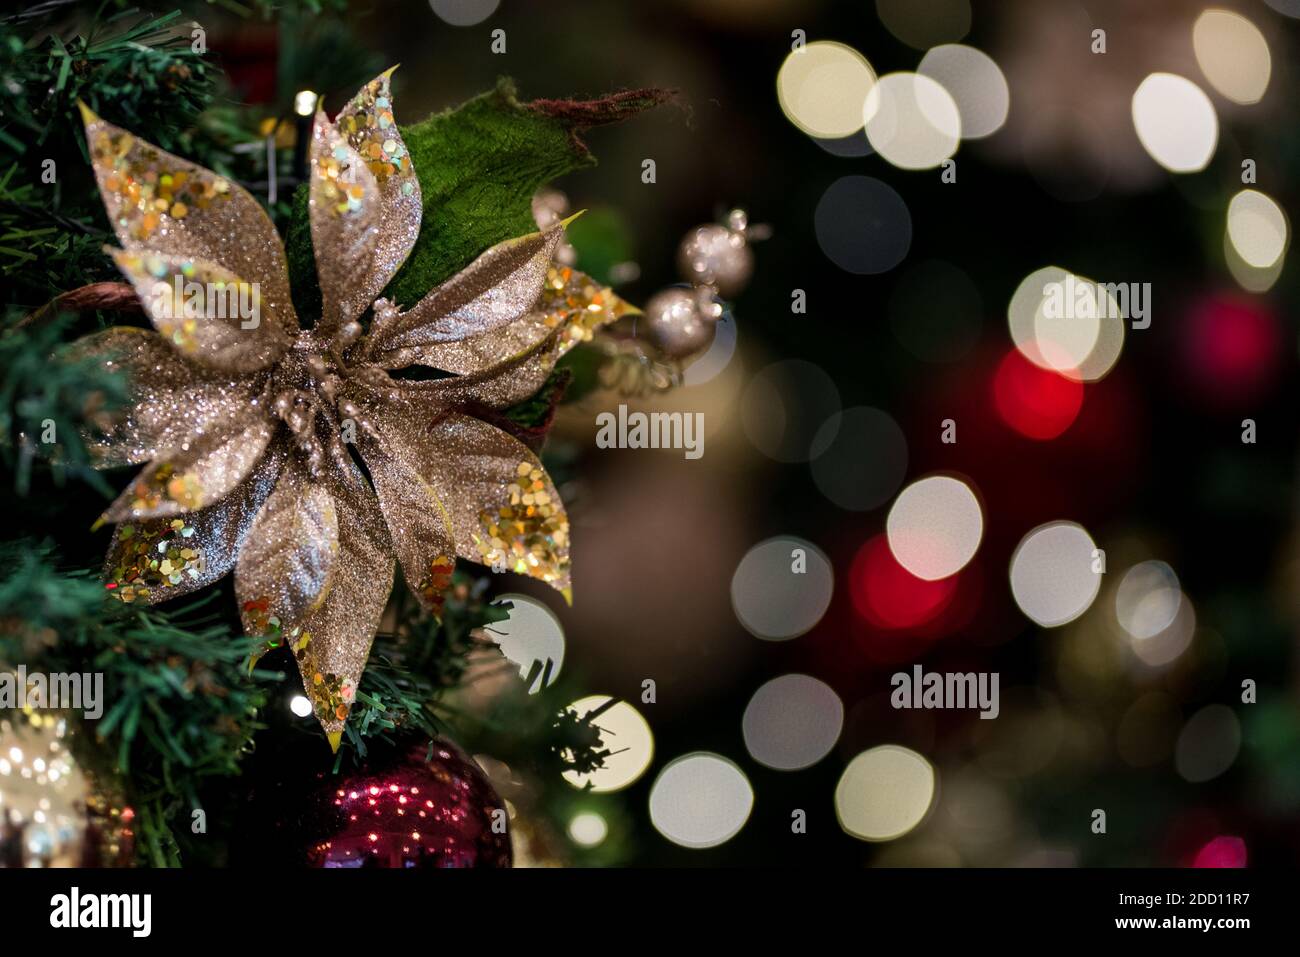 Beautiful Decorative Flower With Christmas Lights Background Stock Photo